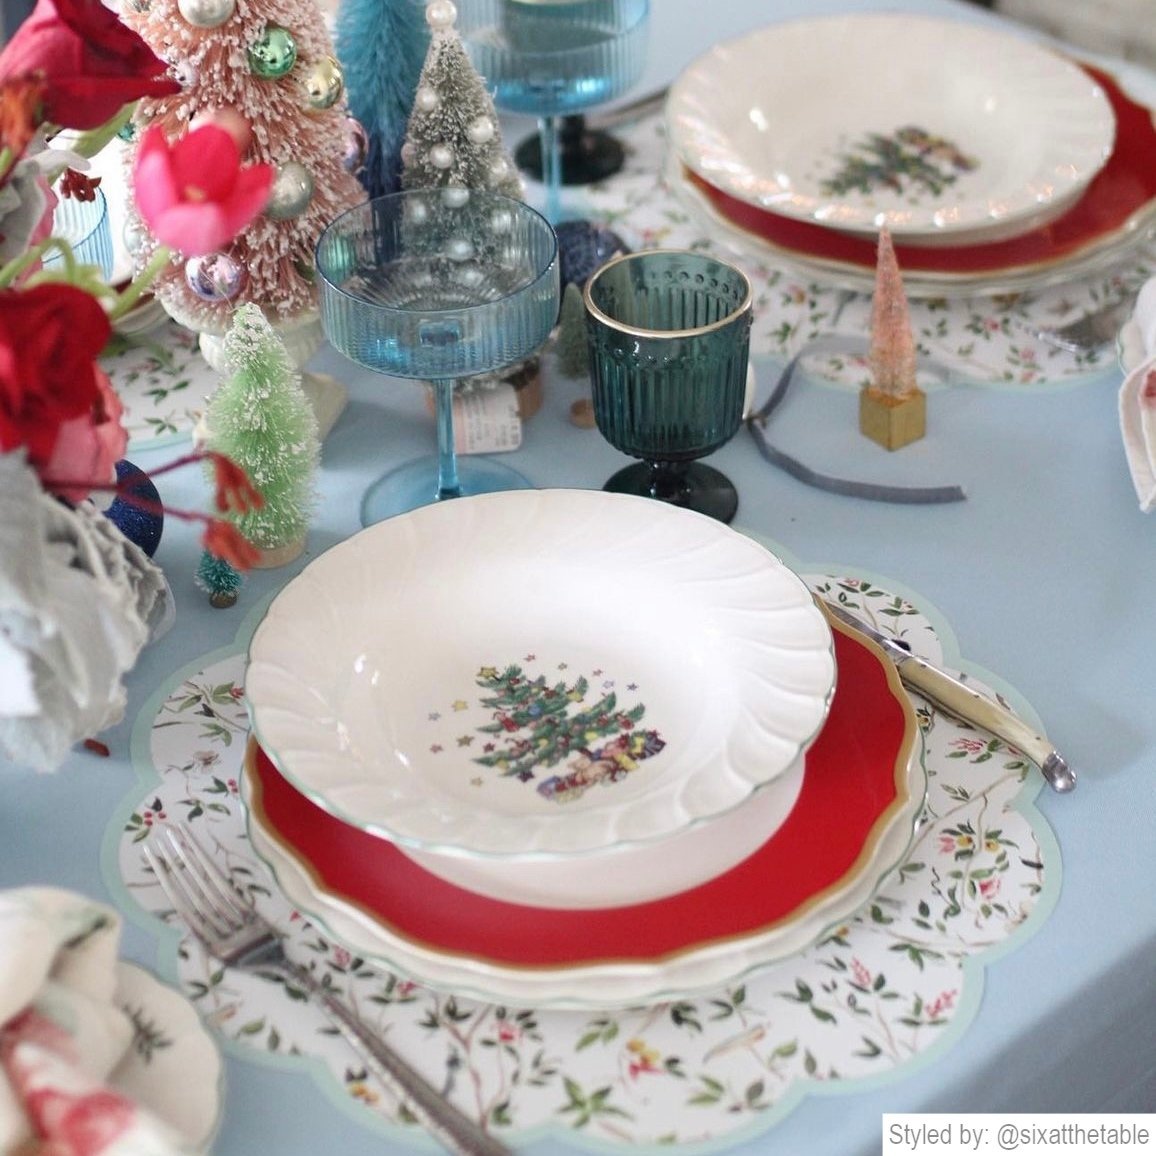 Table setting with chinoiserie round scalloped paper placemats layered with red plates and a white plate featuring a Christmas tree on a light blue tablecloth